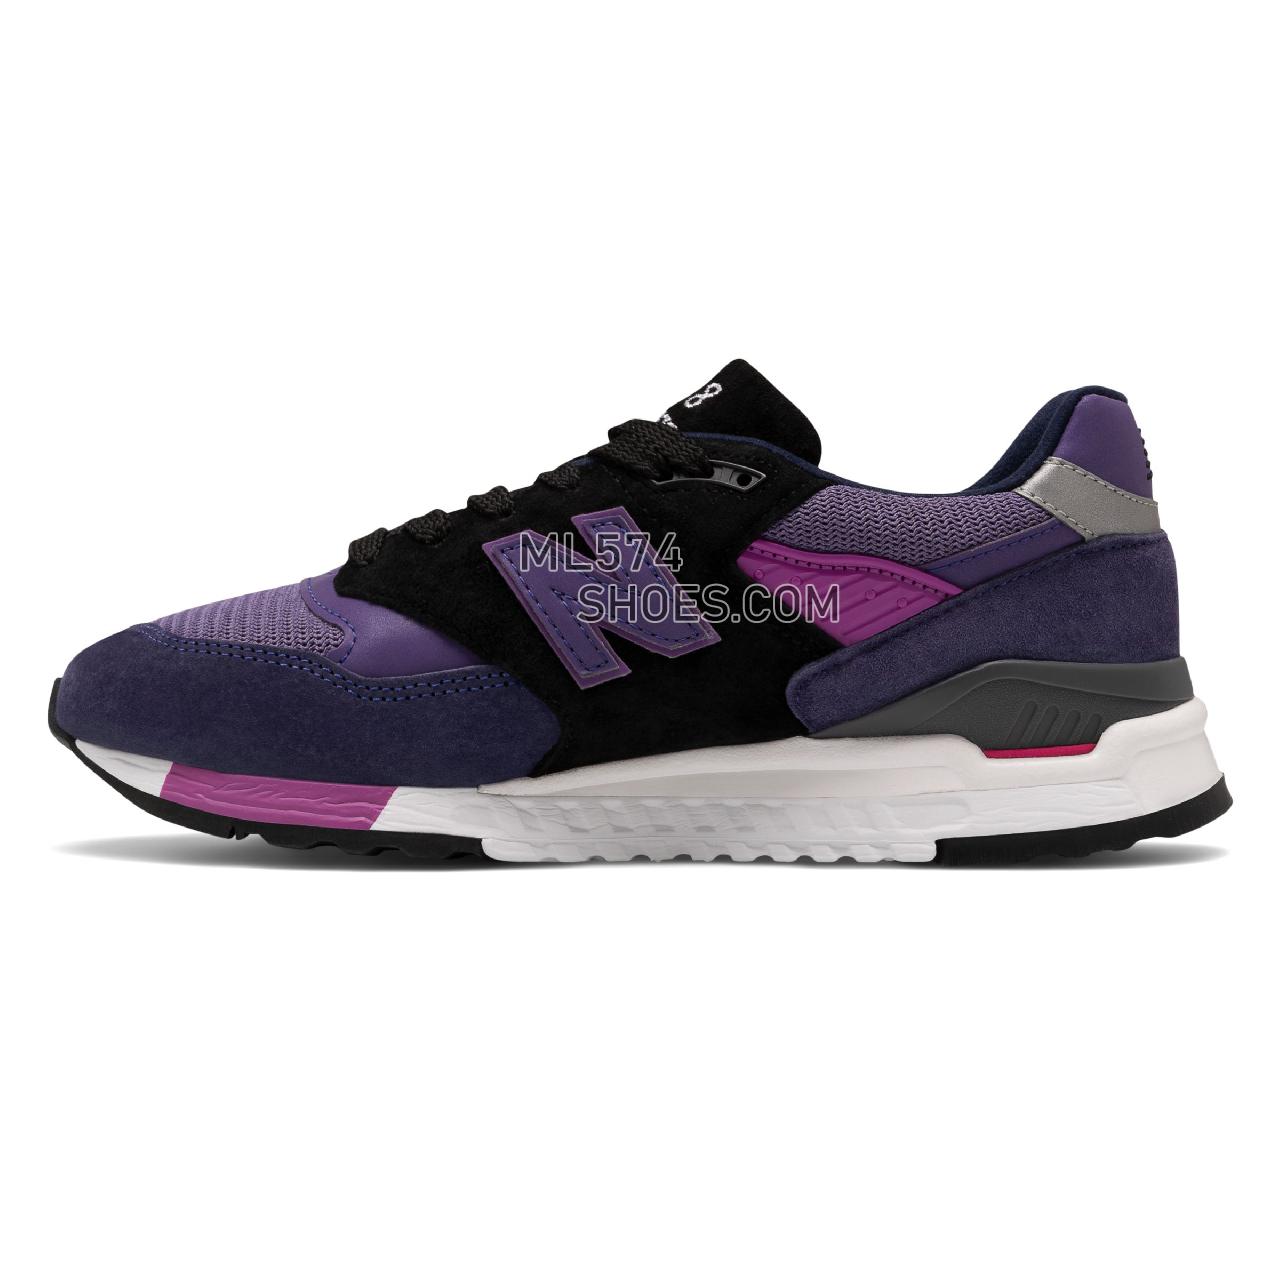 New Balance Made in US 998 - Men's Made in US 998 Classic ML998V1-27545-M - Purple with Black - M998BLD